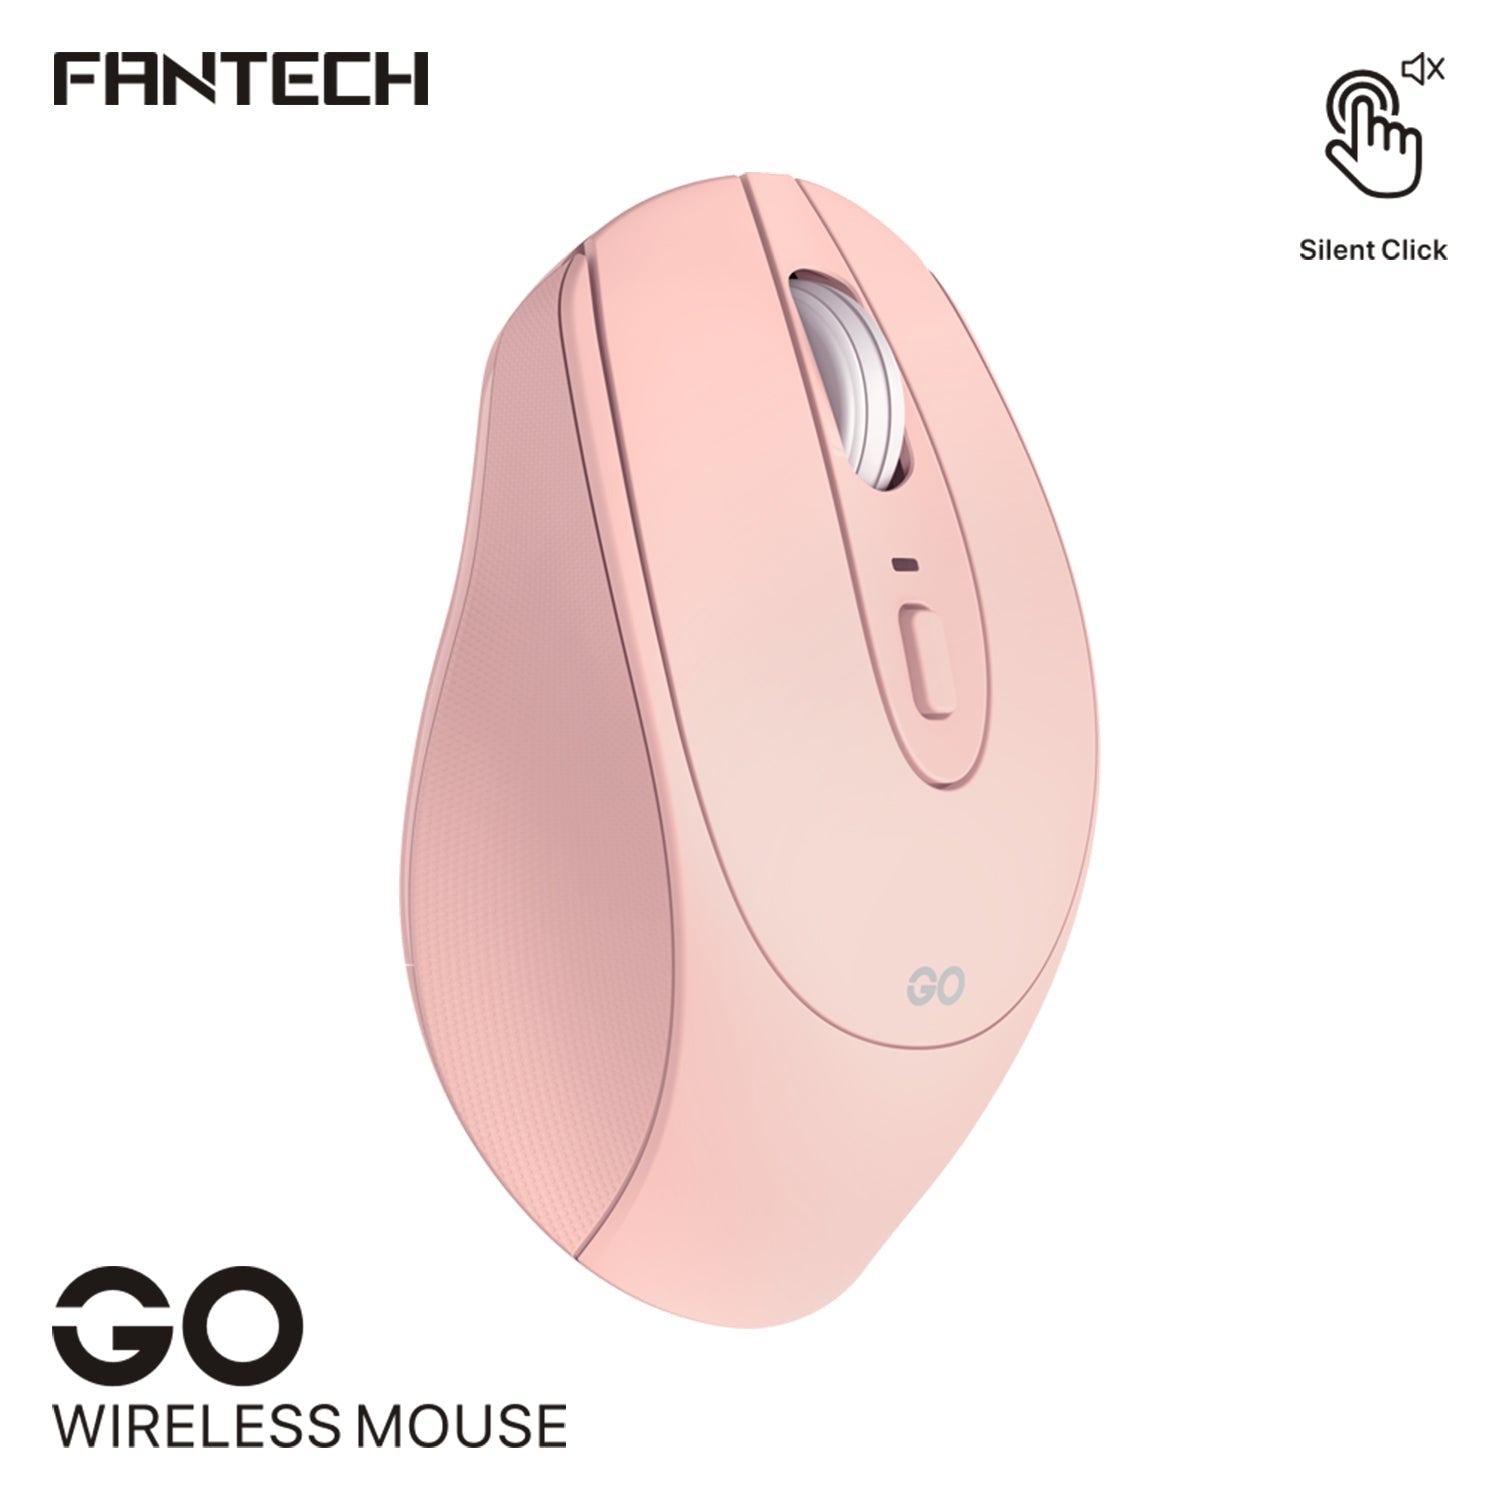 Fantech W191 Wireless Mouse with Silent Click - Fantech Jordan | Gaming Accessories Store 